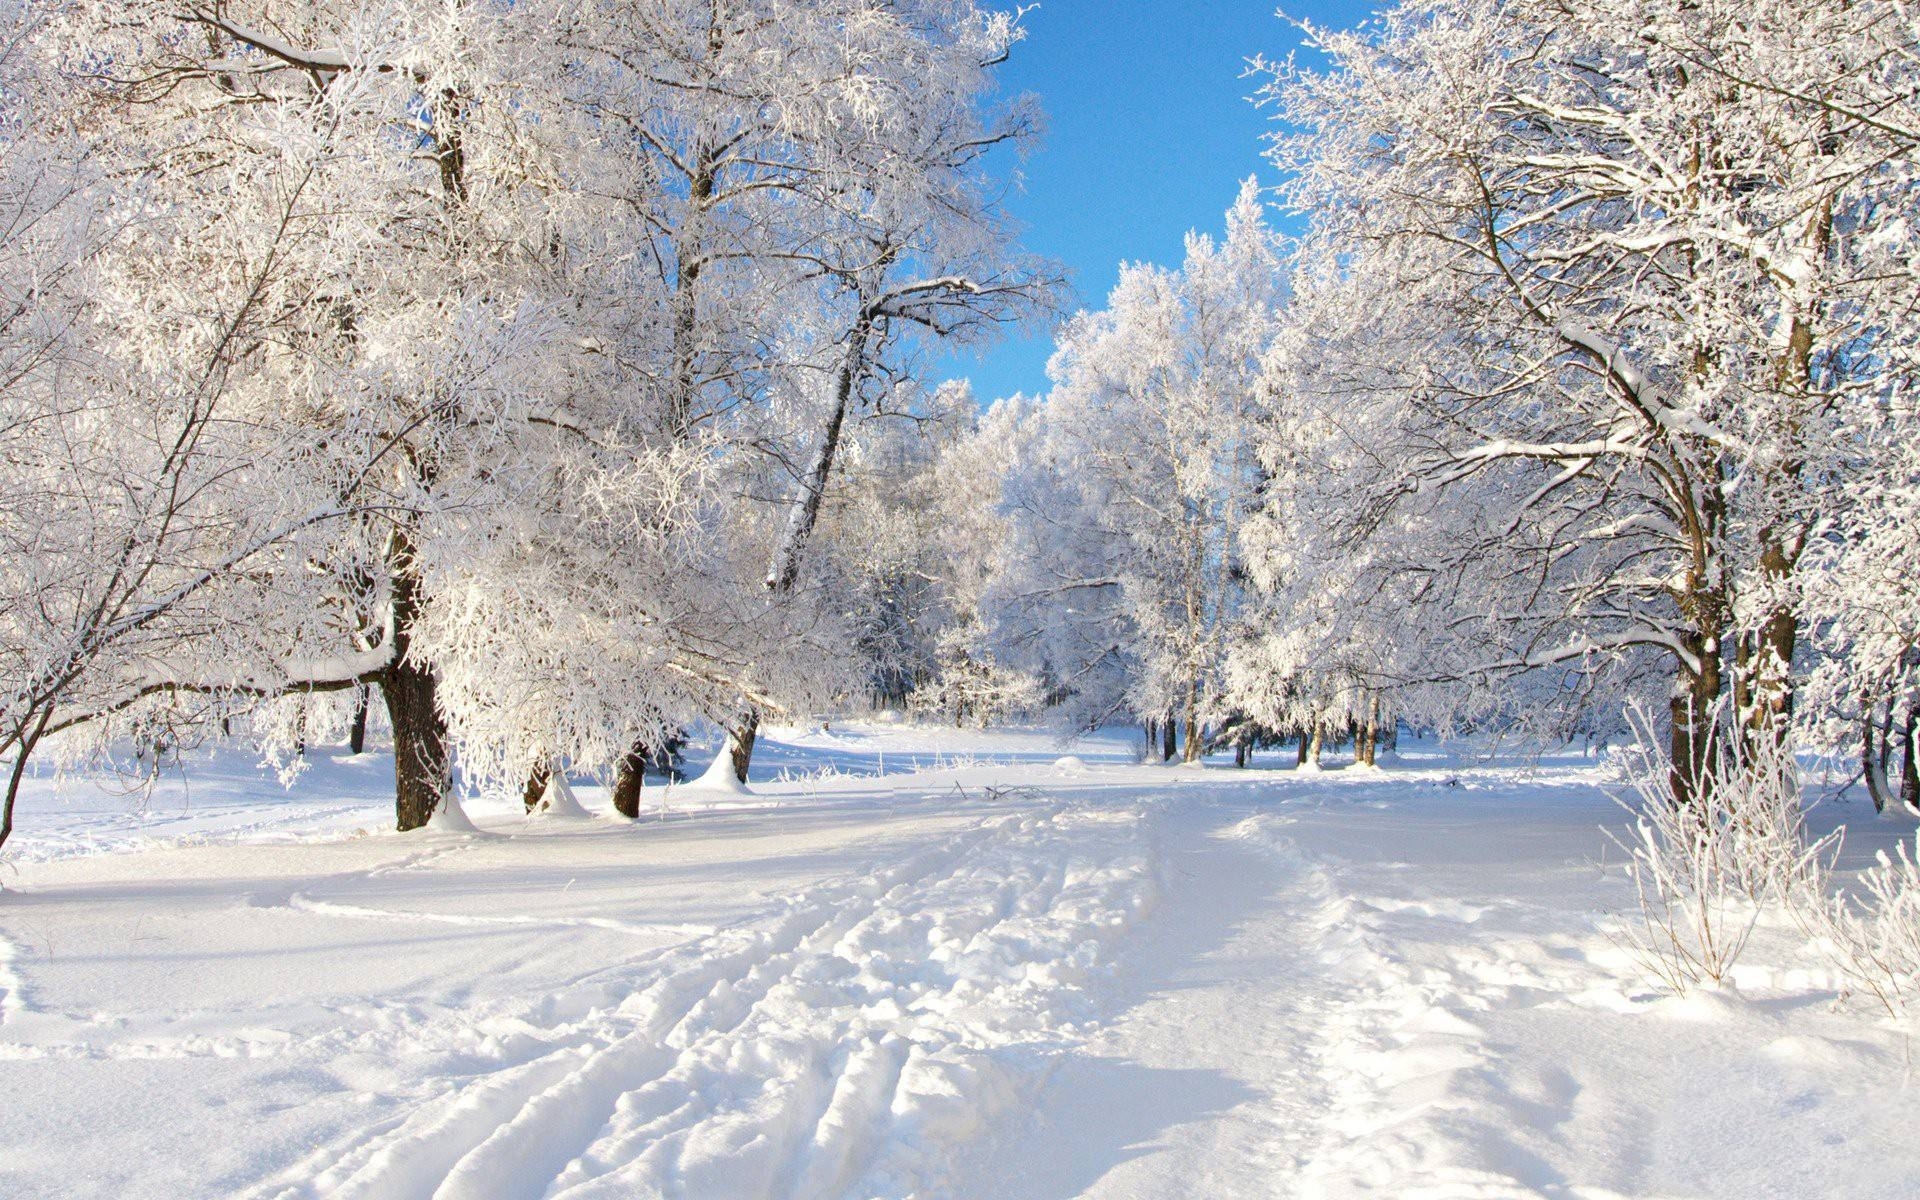 10 New Free Winter Wallpapers And Screensavers FULL HD 1920×1080 For PC Background